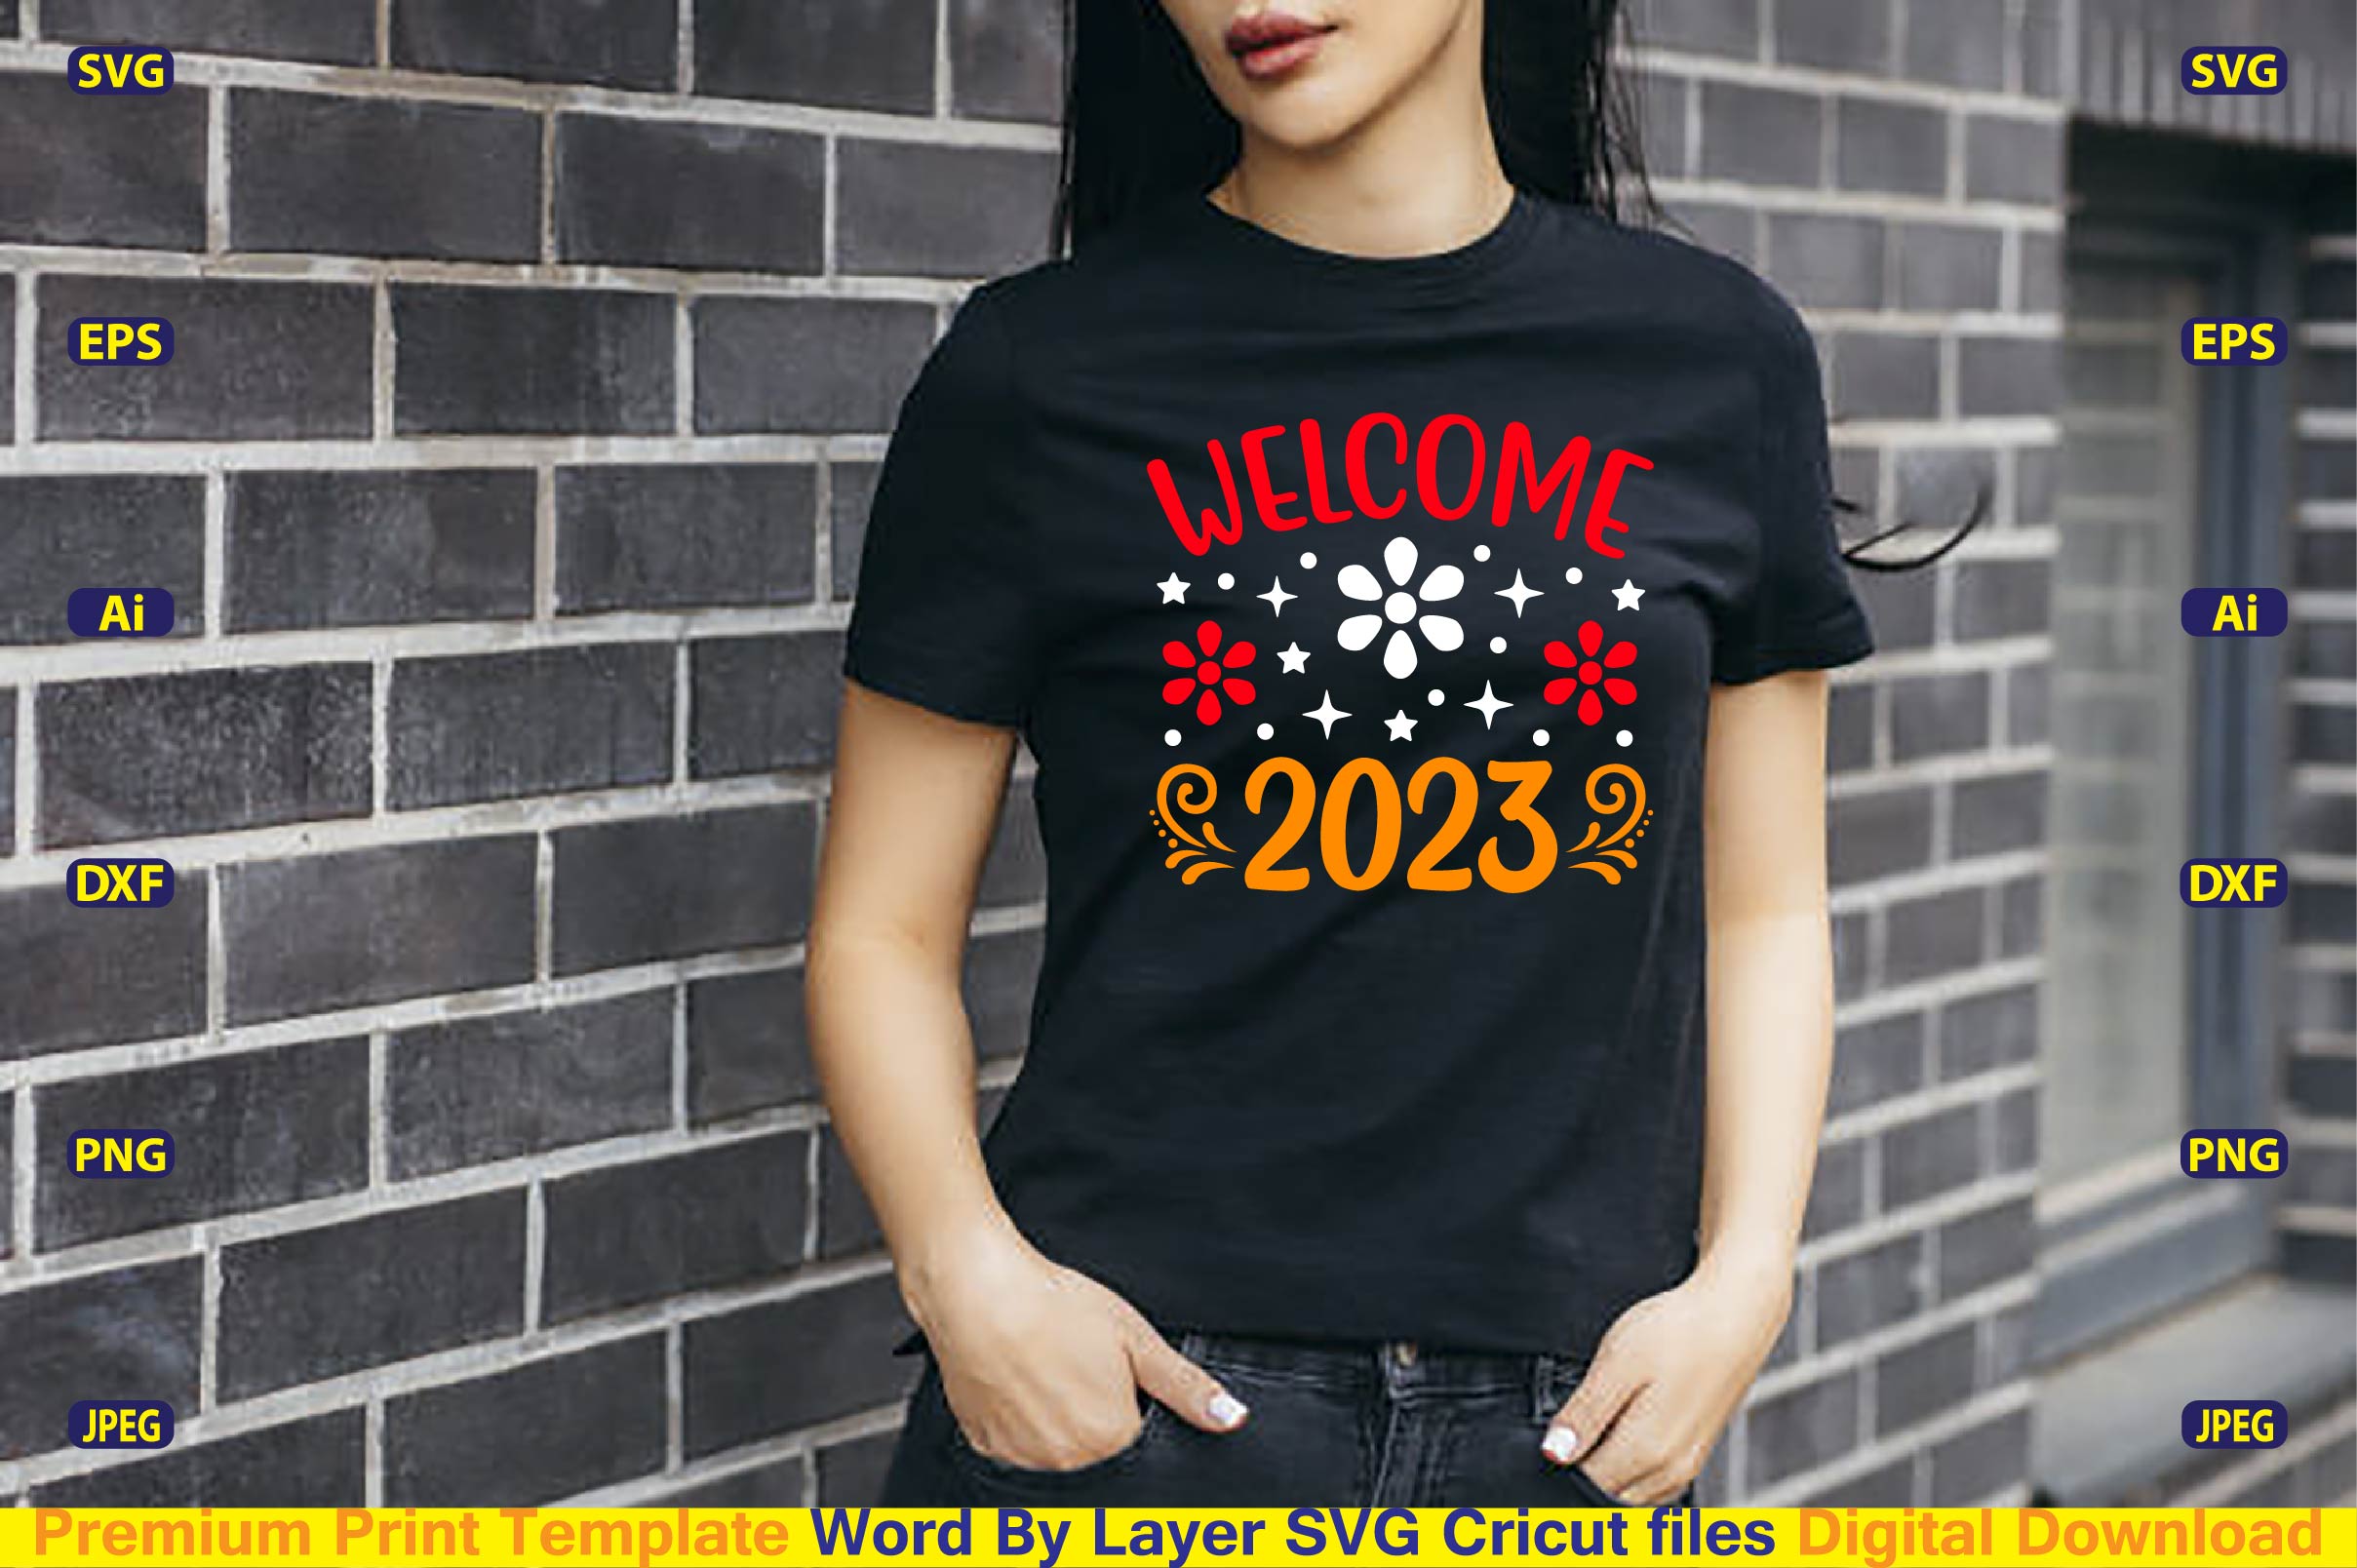 Welcome New Year T-Shirt Design Bundle prevew image.